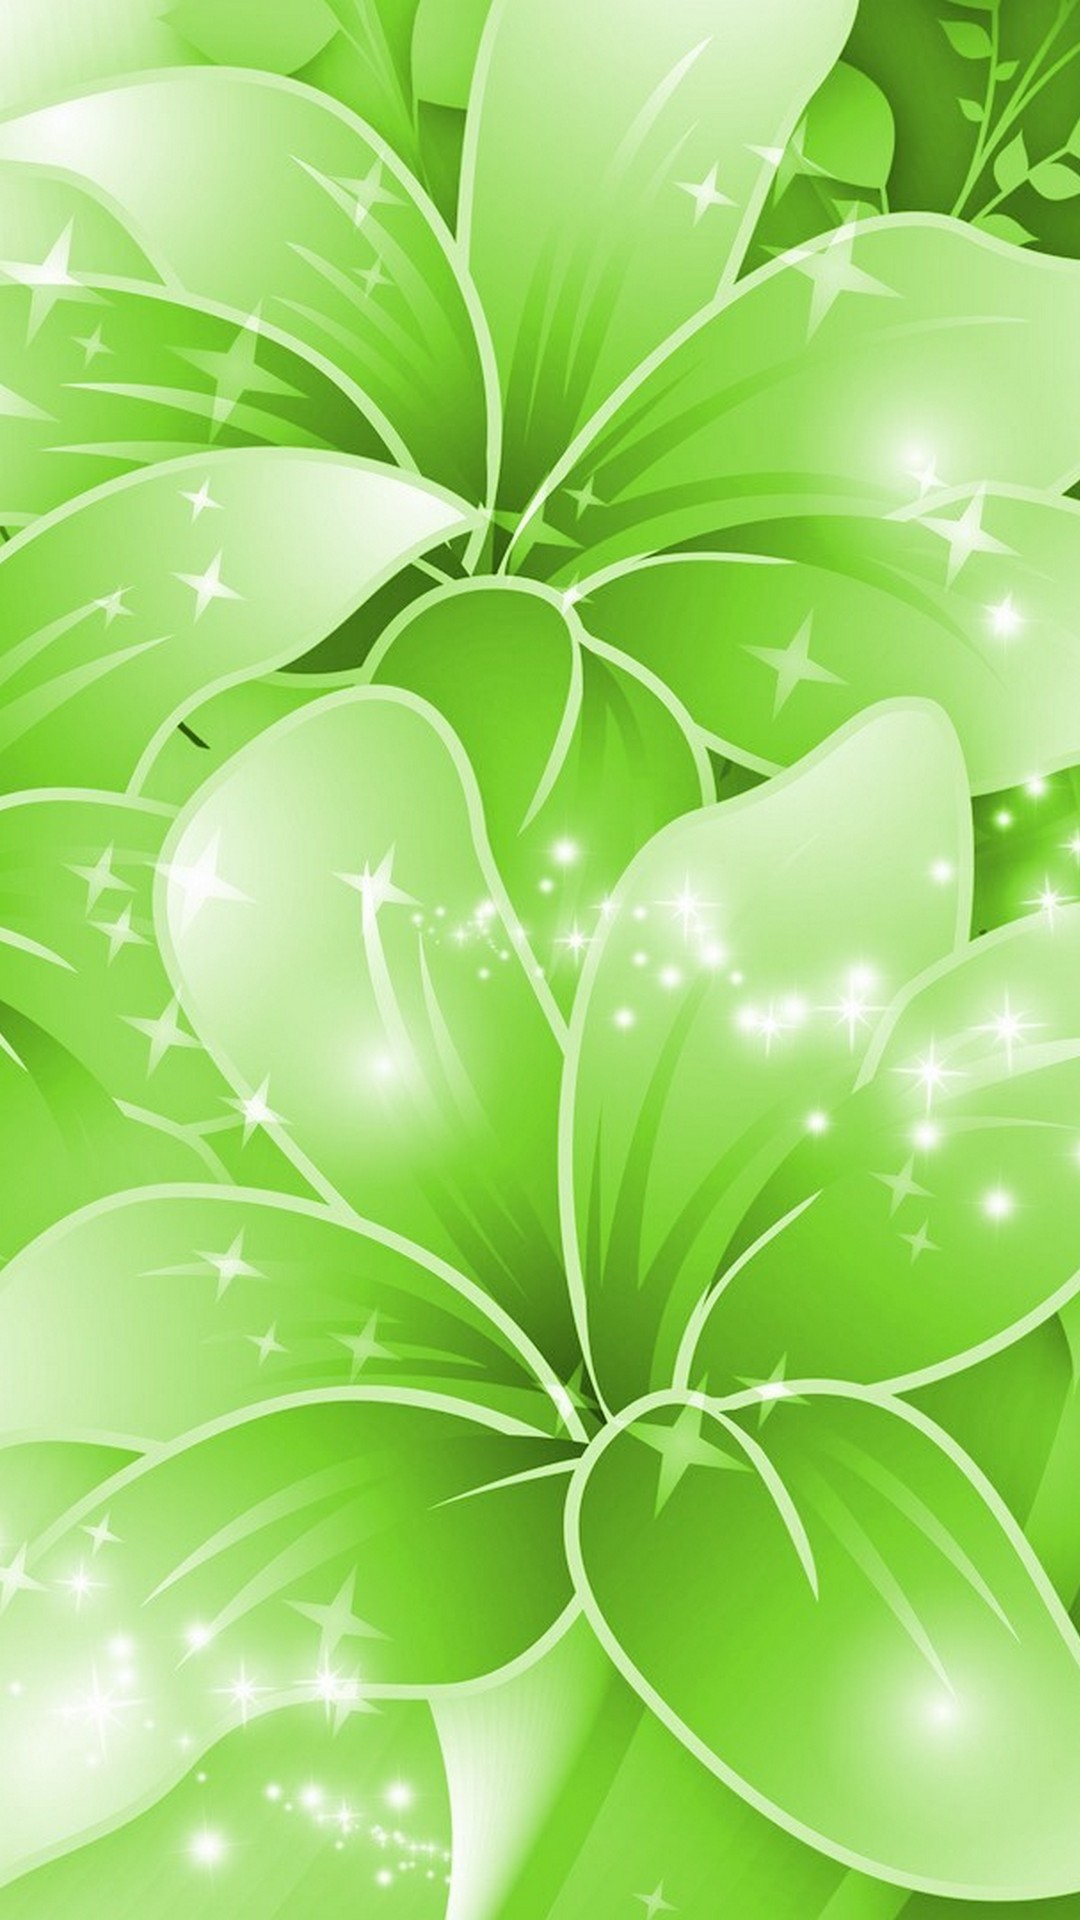 iPhone Wallpaper Light Green with resolution 1080X1920 pixel. You can make this wallpaper for your iPhone 5, 6, 7, 8, X backgrounds, Mobile Screensaver, or iPad Lock Screen